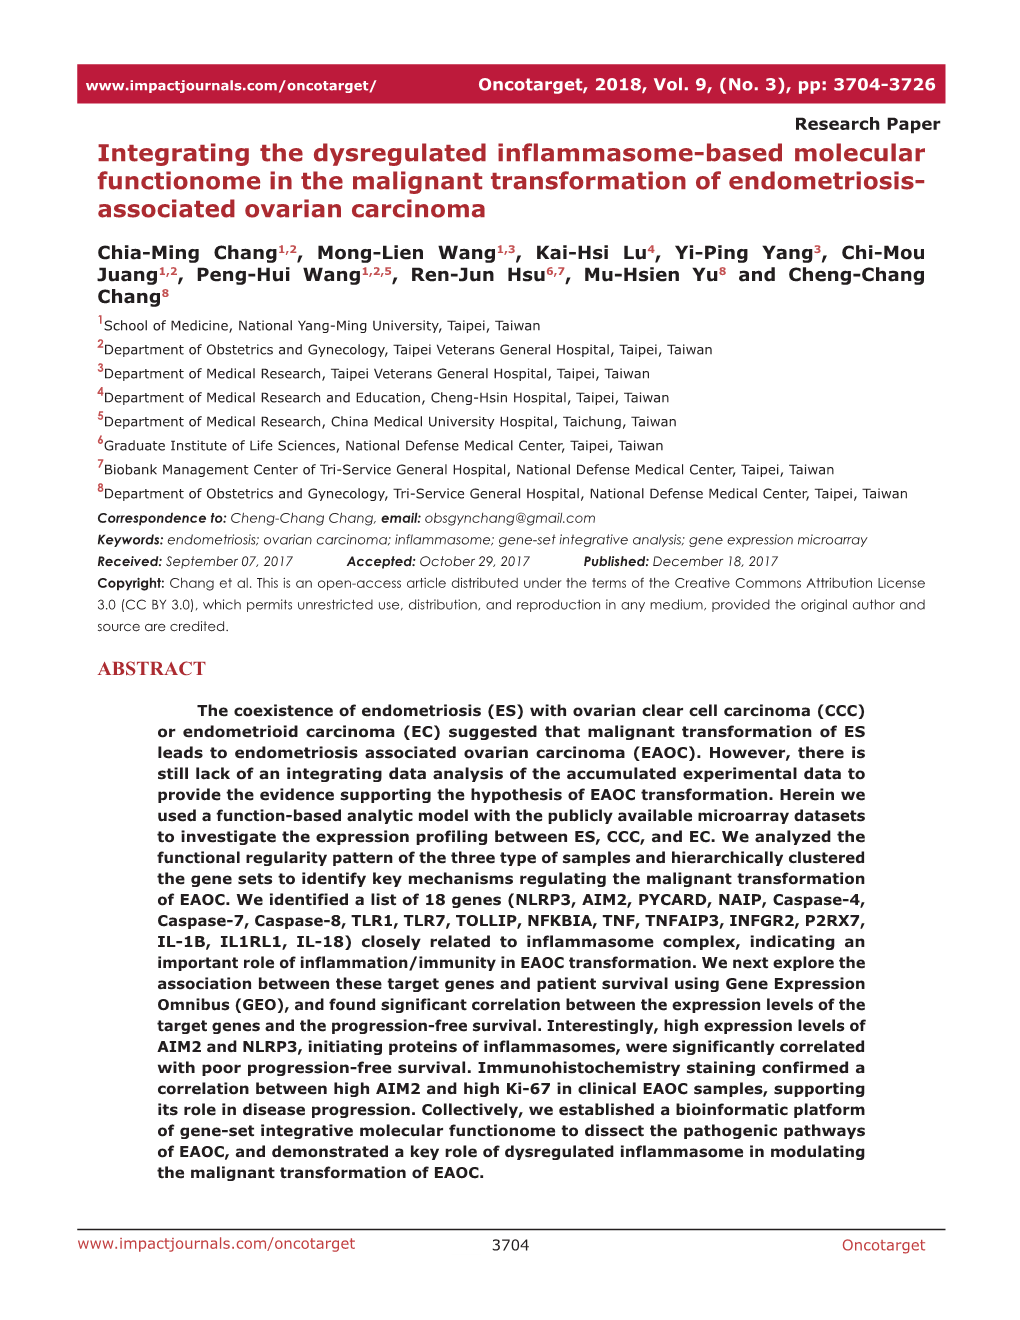 Integrating the Dysregulated Inflammasome-Based Molecular Functionome in the Malignant Transformation of Endometriosis- Associated Ovarian Carcinoma